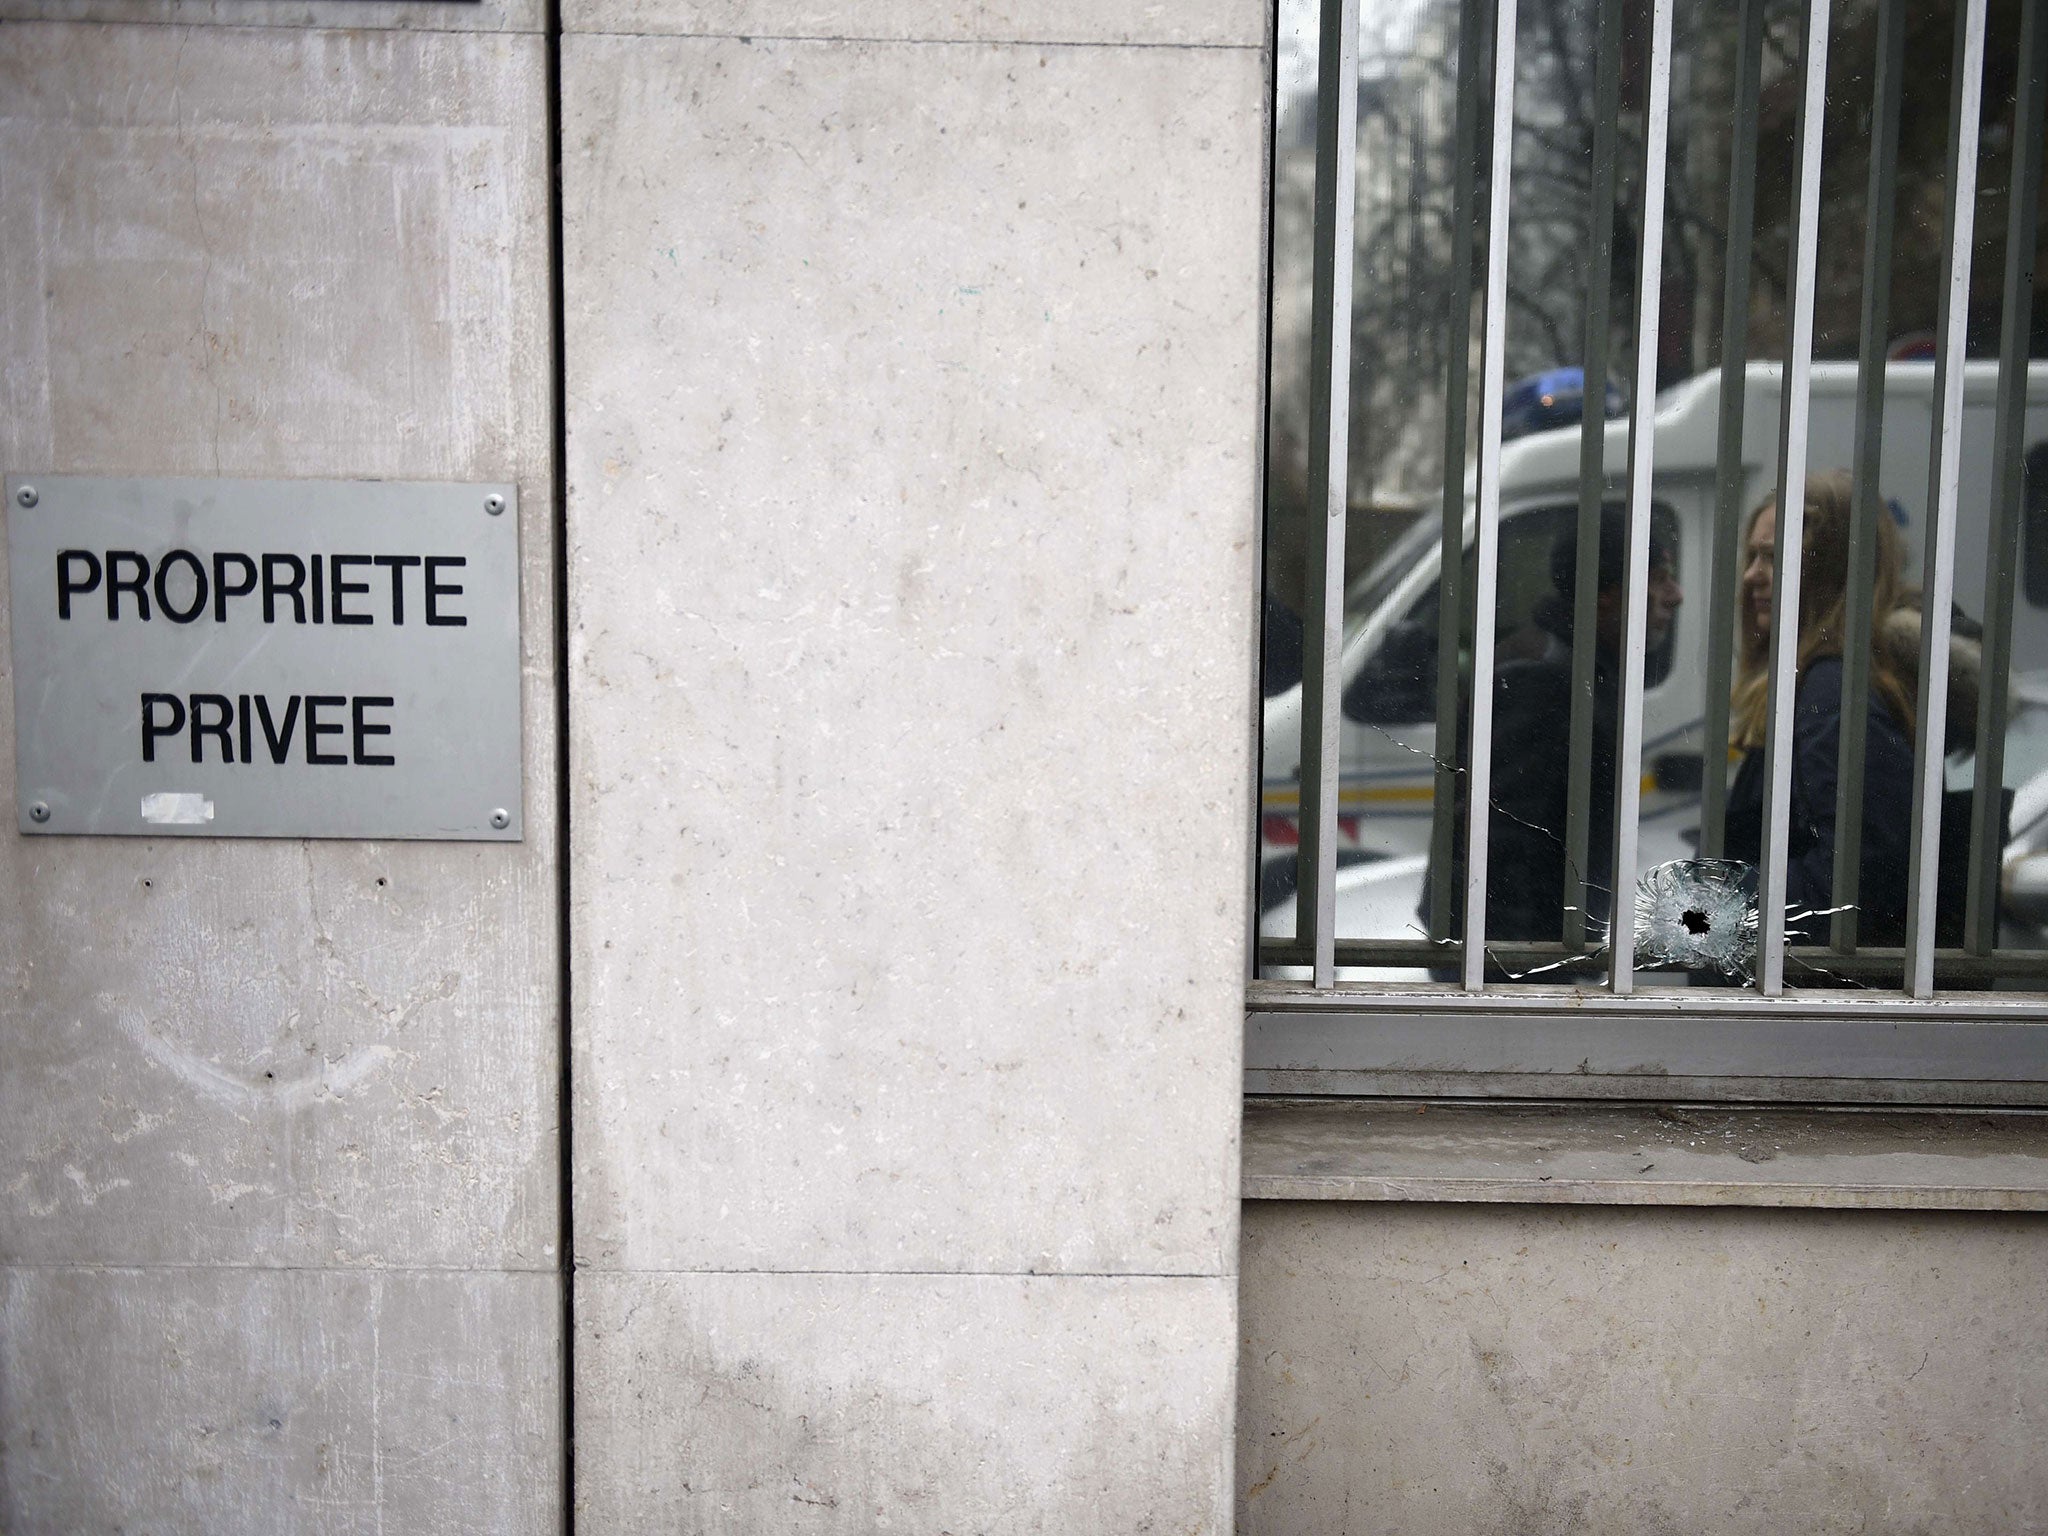 A bullet's impact on the window of the offices of the French satirical newspaper Charlie Hebdo in Paris, after armed gunmen stormed the offices leaving at least 10 people dead